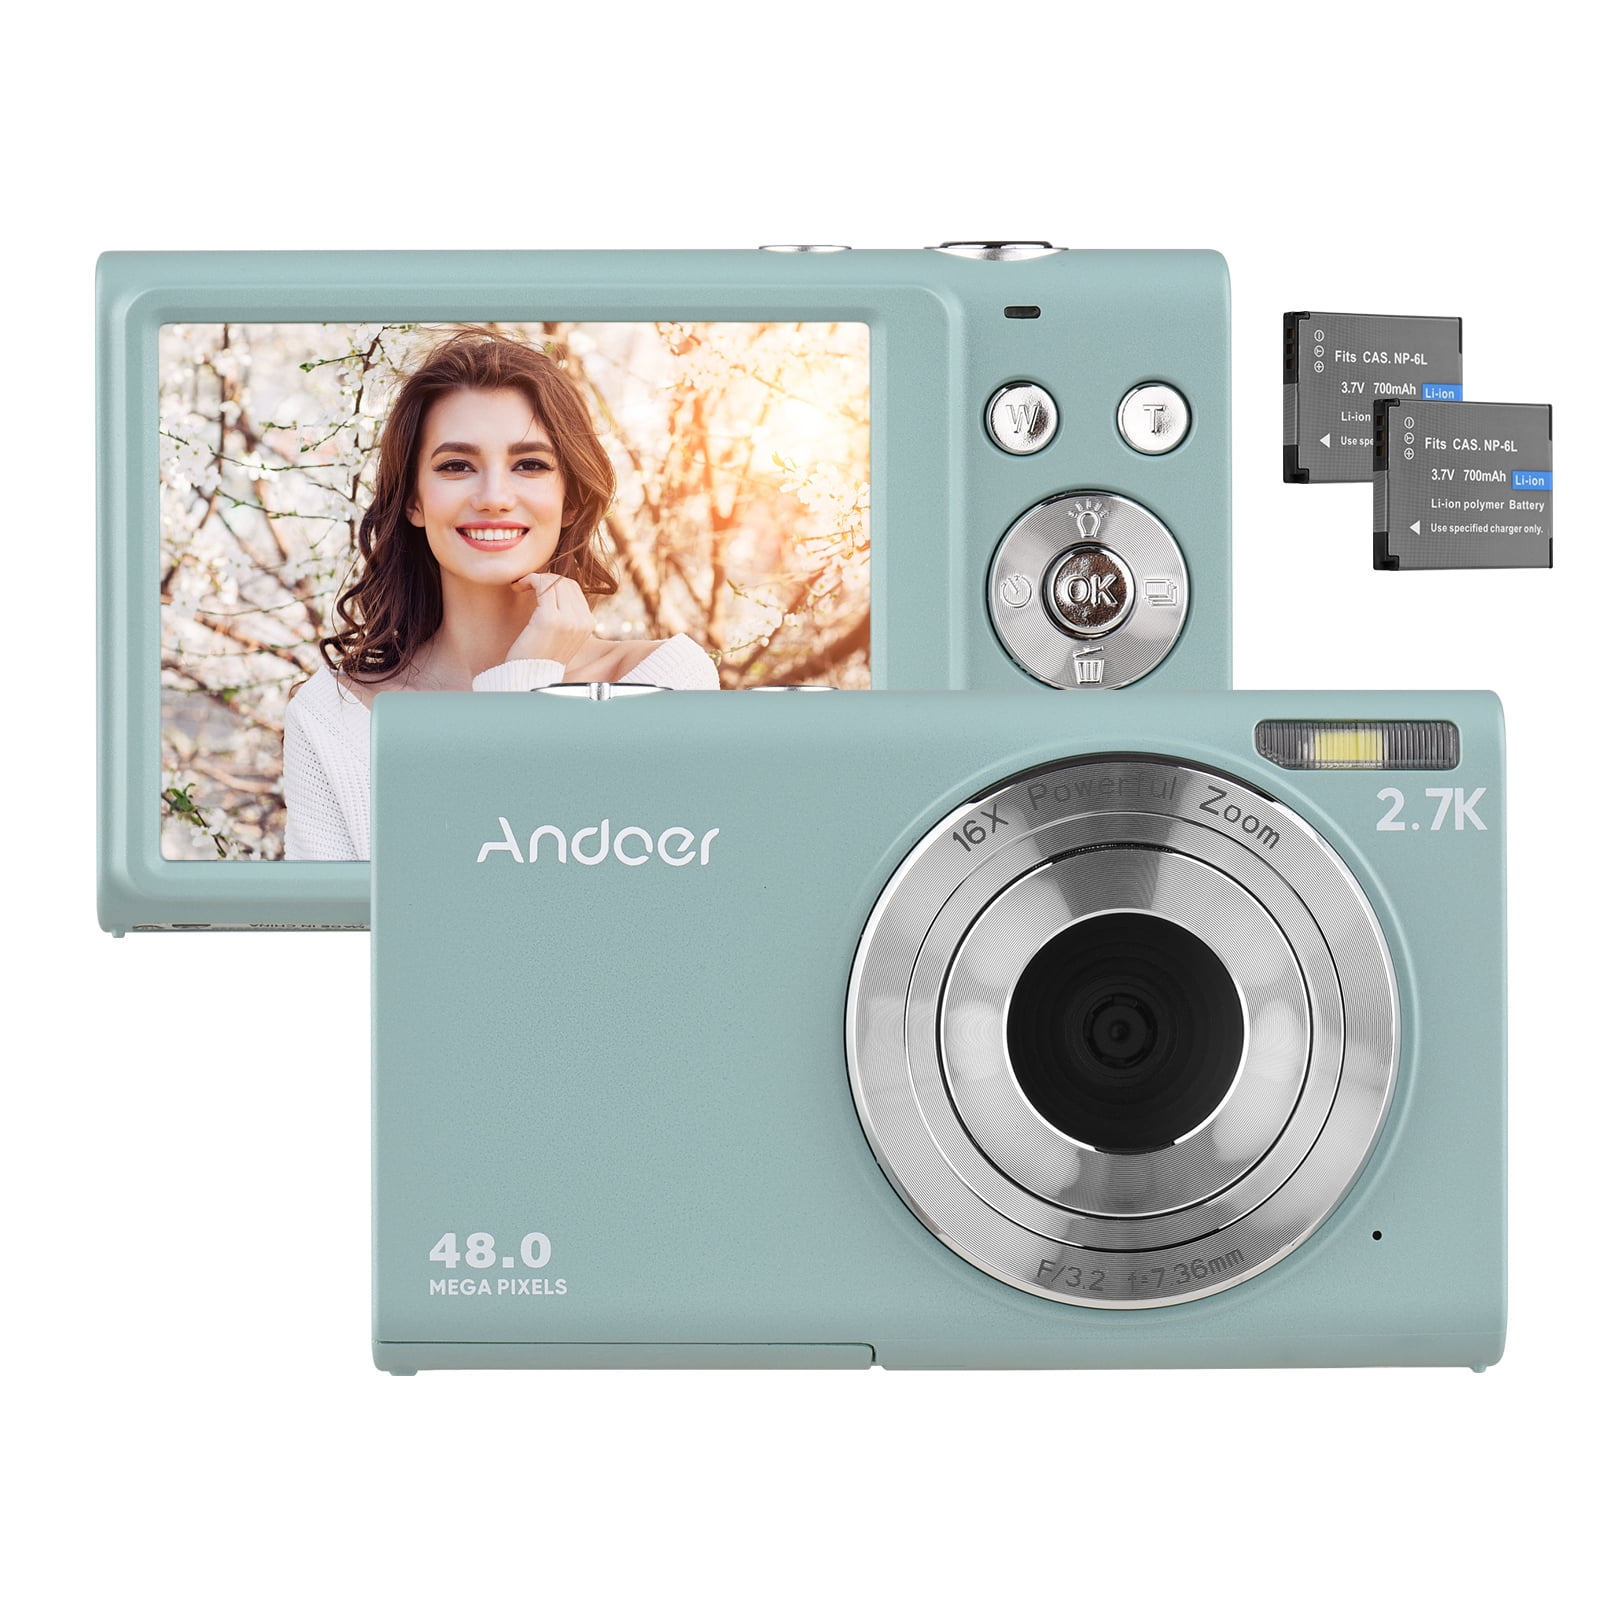 Andoer Digital Camera Compact Video Camcorder 48MP Auto Focus 2.88 Inch IPS Screen 16X Zoom Anti-shake Face Detact Capture Built-in LED Fill Light - Walmart.com